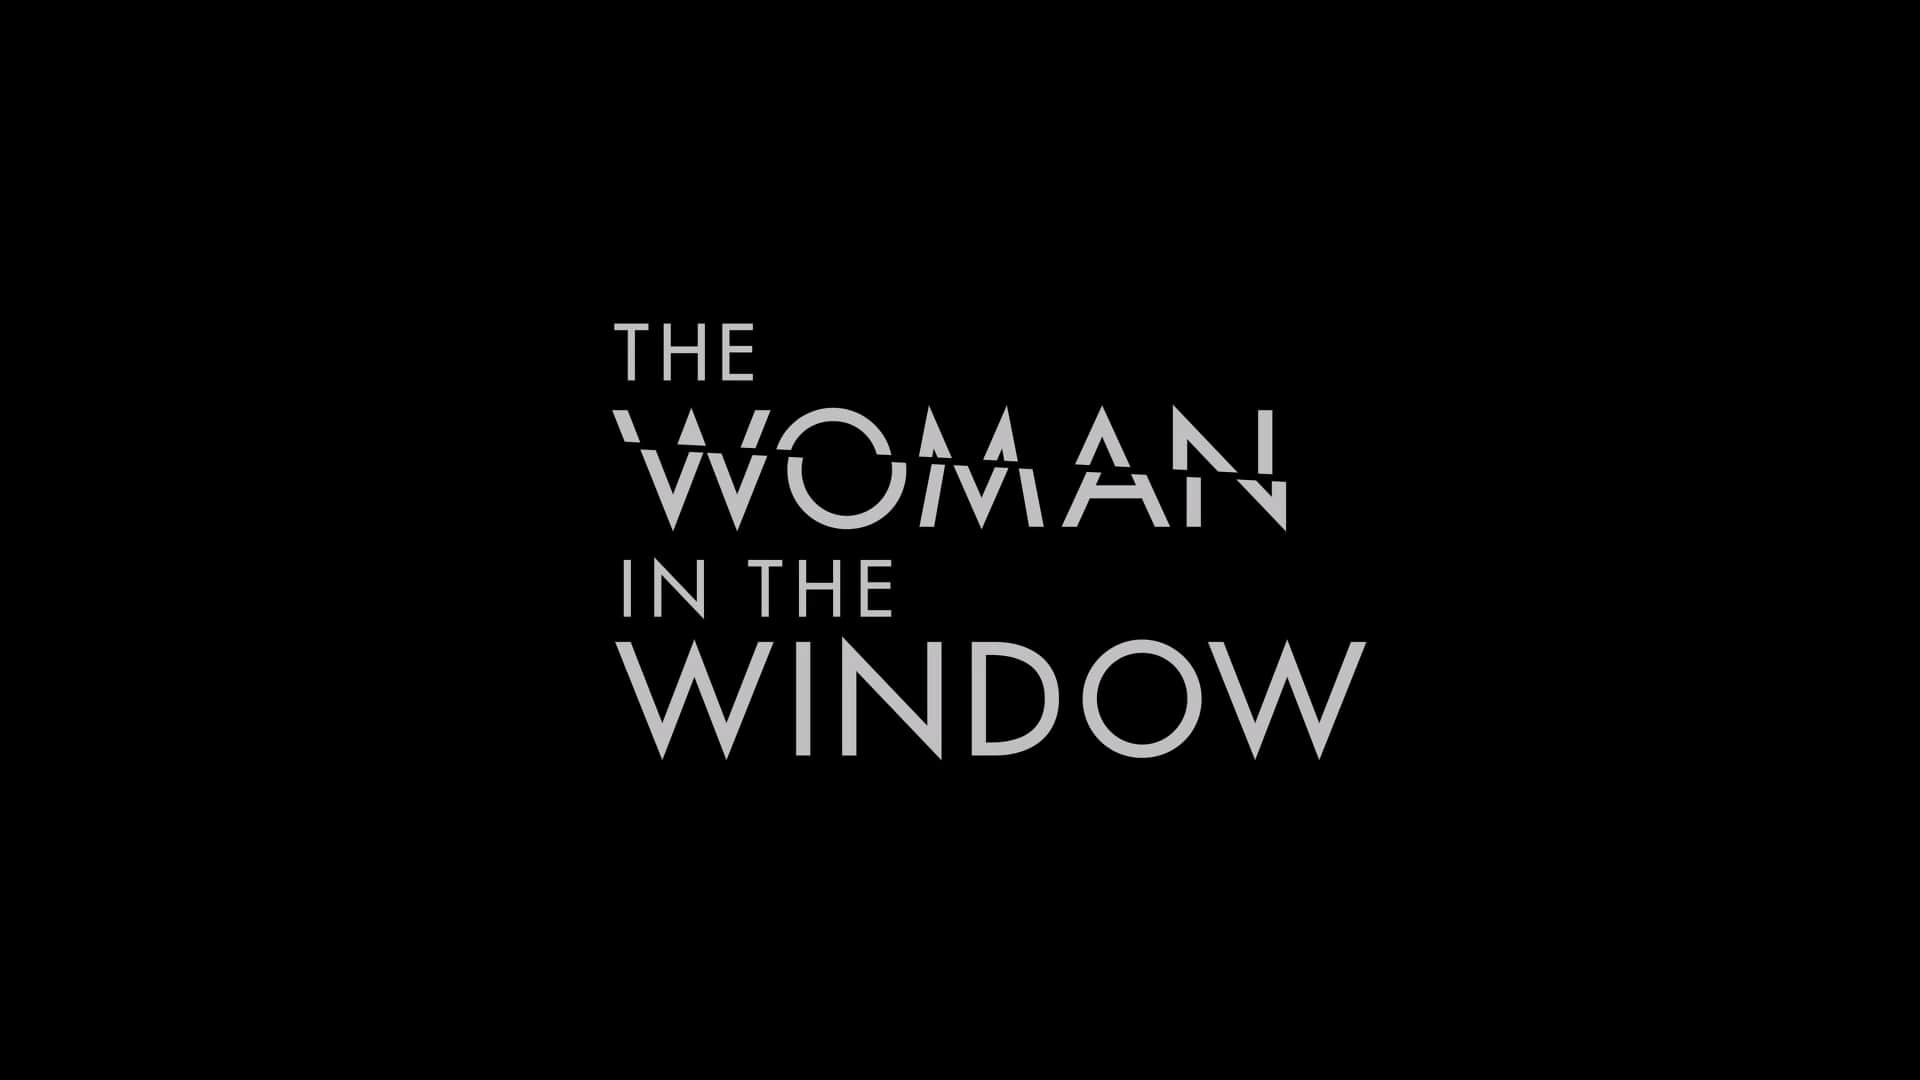 Netflix The Woman in the Window Trailer, Netflix Mystery Movies, Coming to Netflix in May 2021